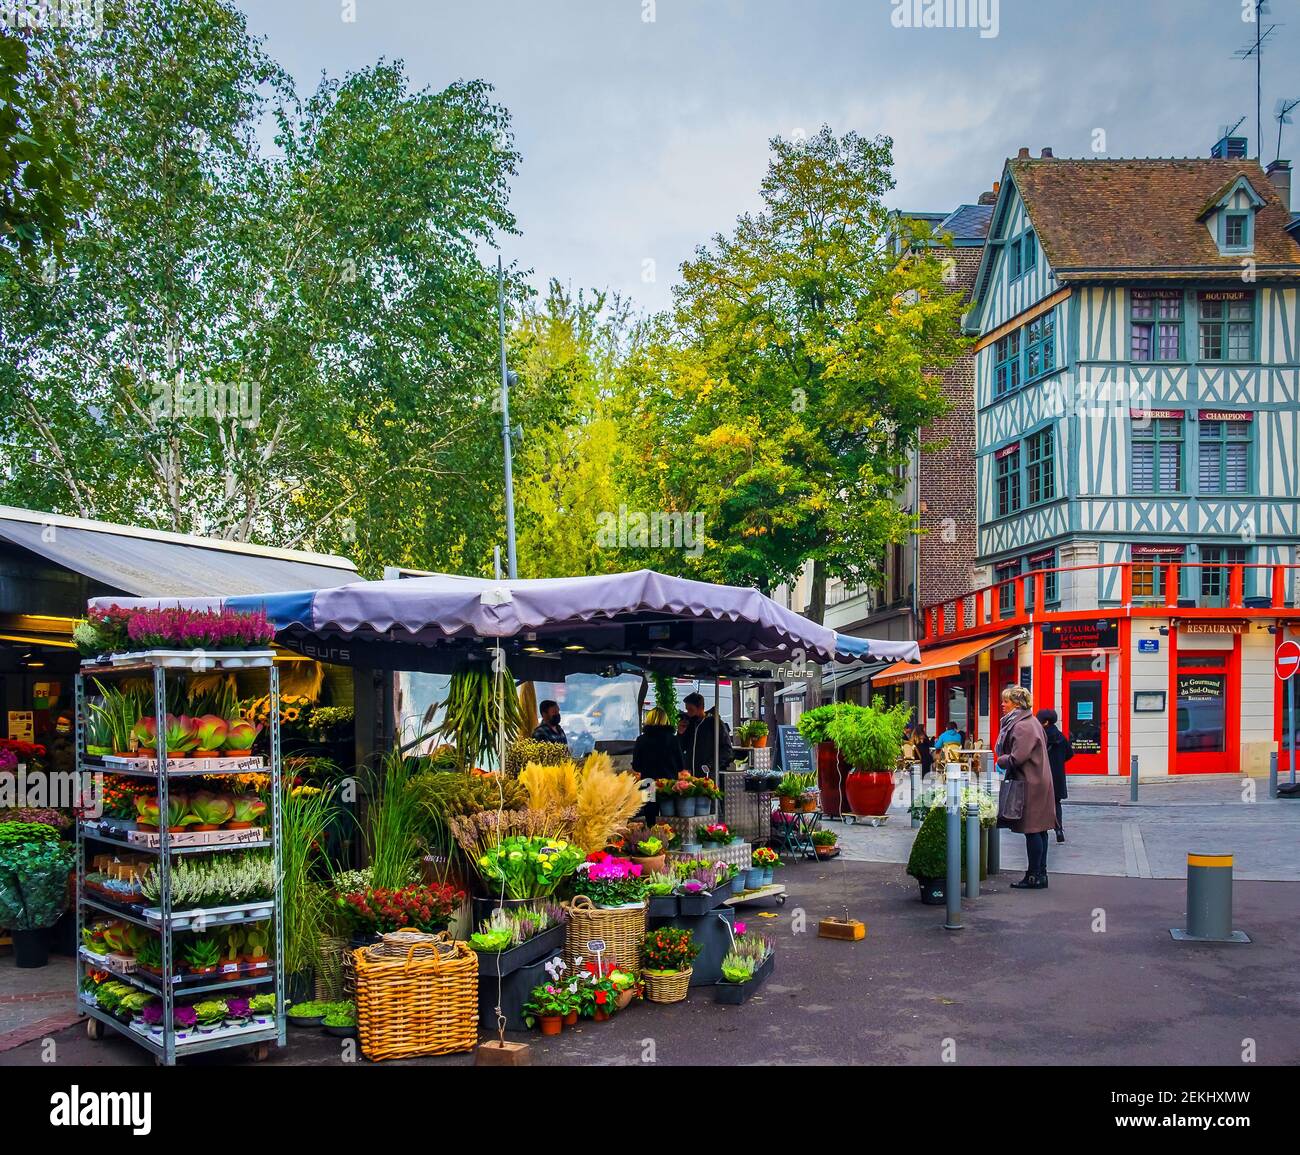 Rouen, France, Oct 2020, view of a flower stall at the "Place du vieux marché " in the old part of the city Stock Photo